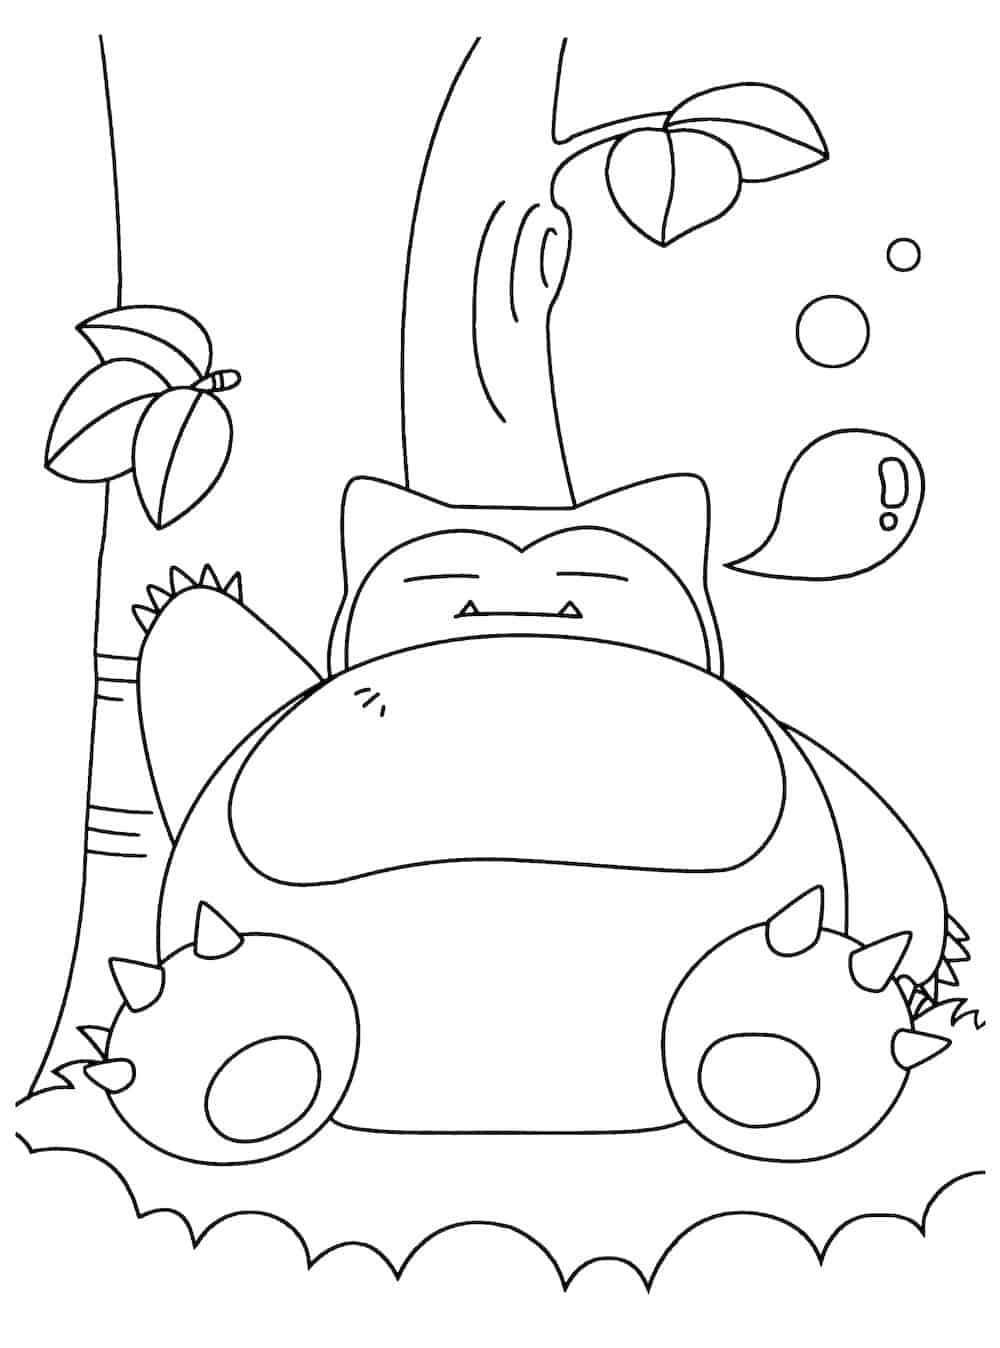 sleepy snorlax coloring pages